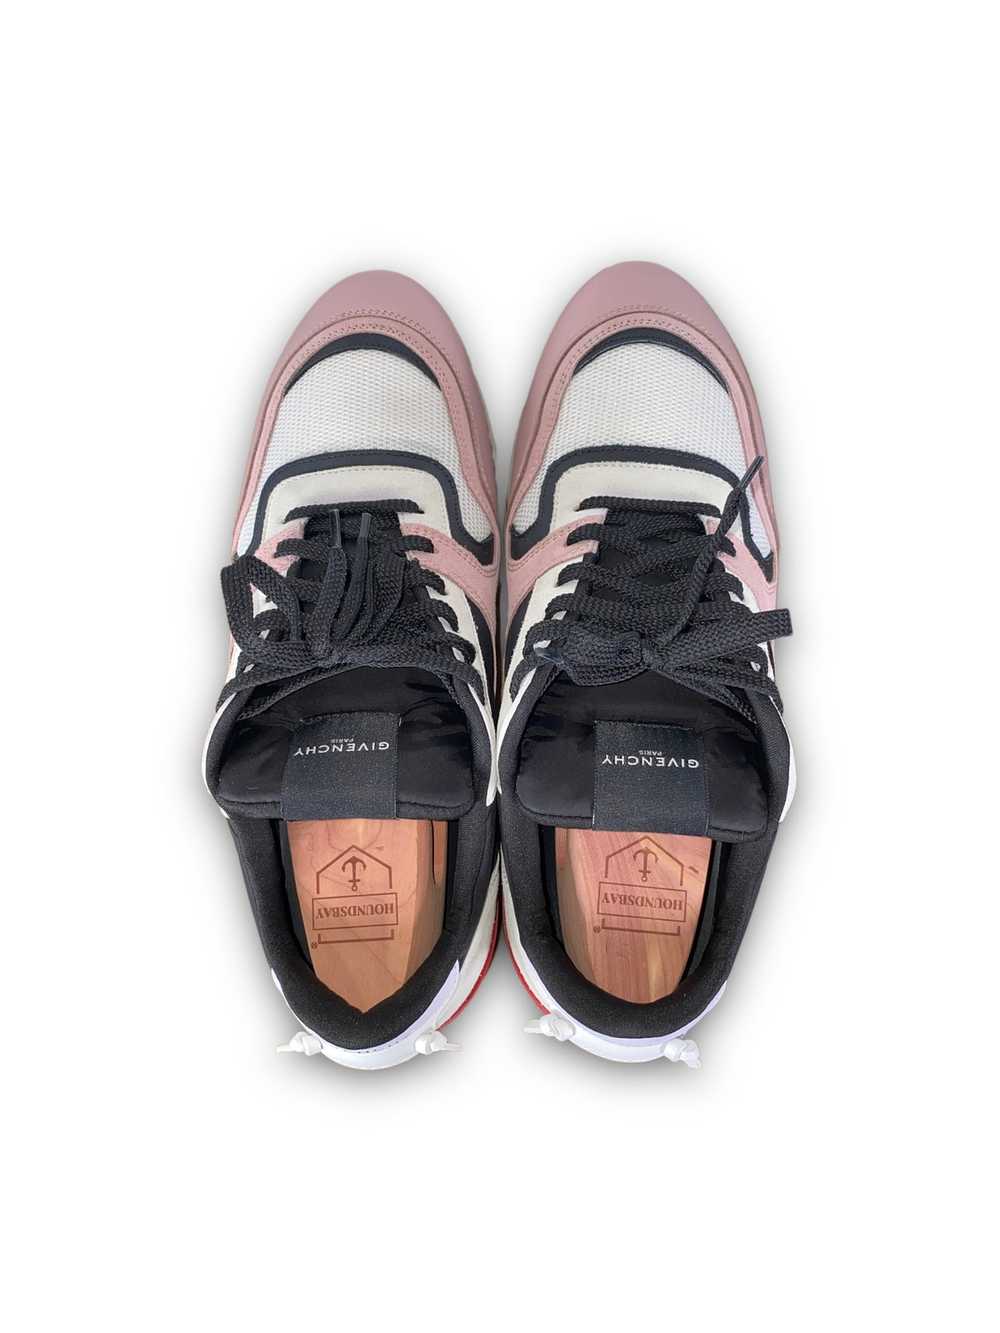 Givenchy Runner Active Trainers, size 42, Pink - image 5